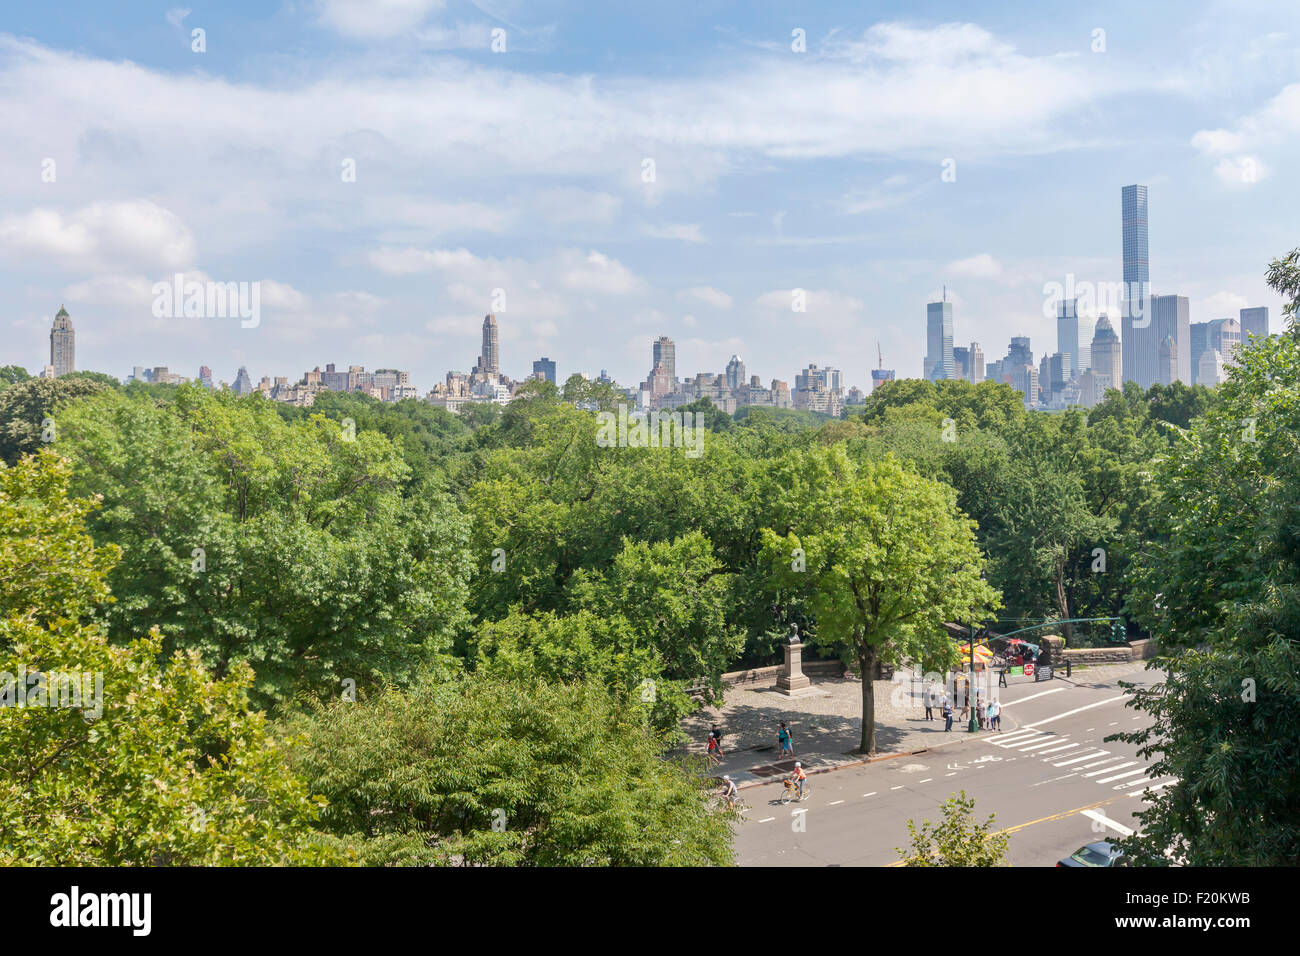 A view of people walking, on bicycles and cars by Central Park, Manhattan, New York City. Stock Photo